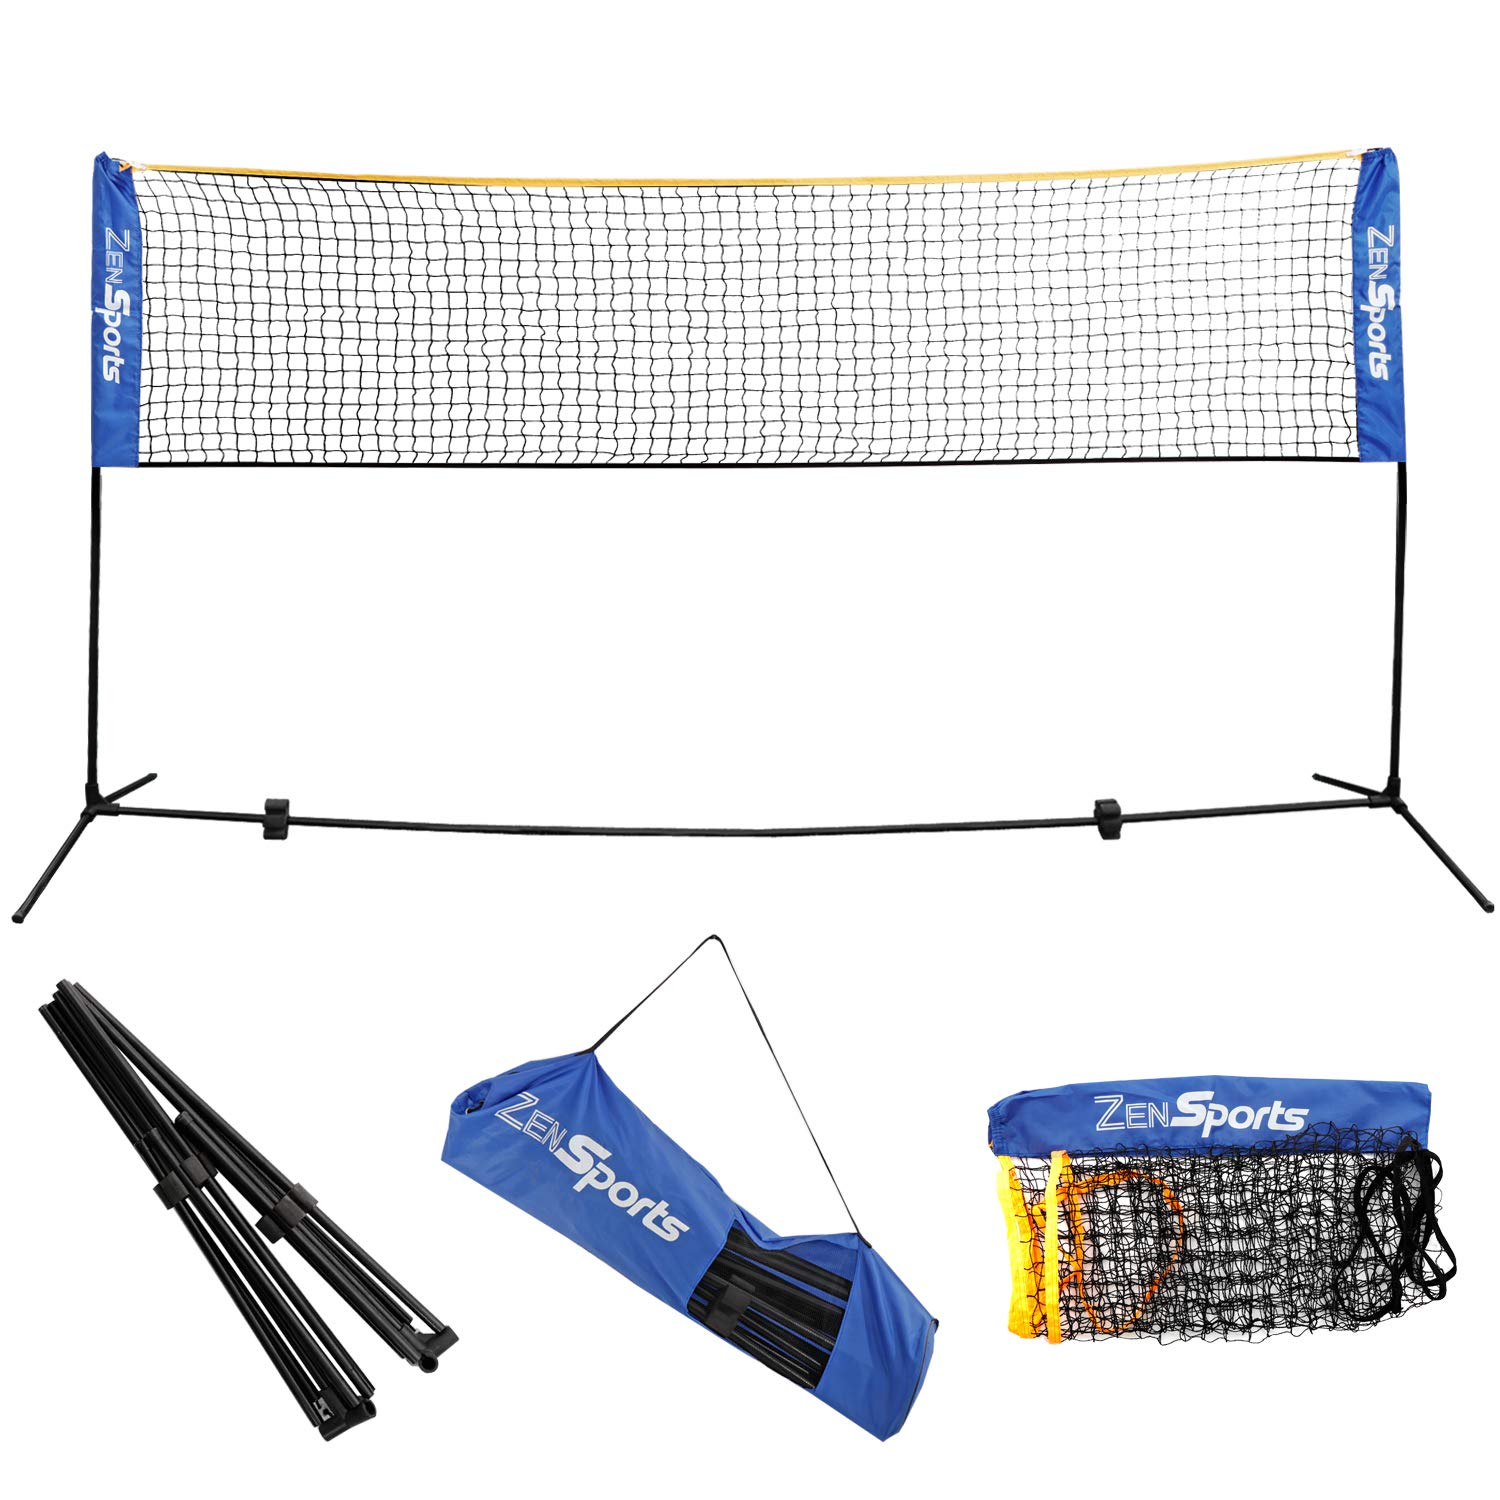 ZENY 10ft Portable Badminton Pickleball Net Tennis Net for Soccer, Pickleball, Kids Volleyball Indoor Adjustable Height 2.5ft to 5ft for Outdoor Co...